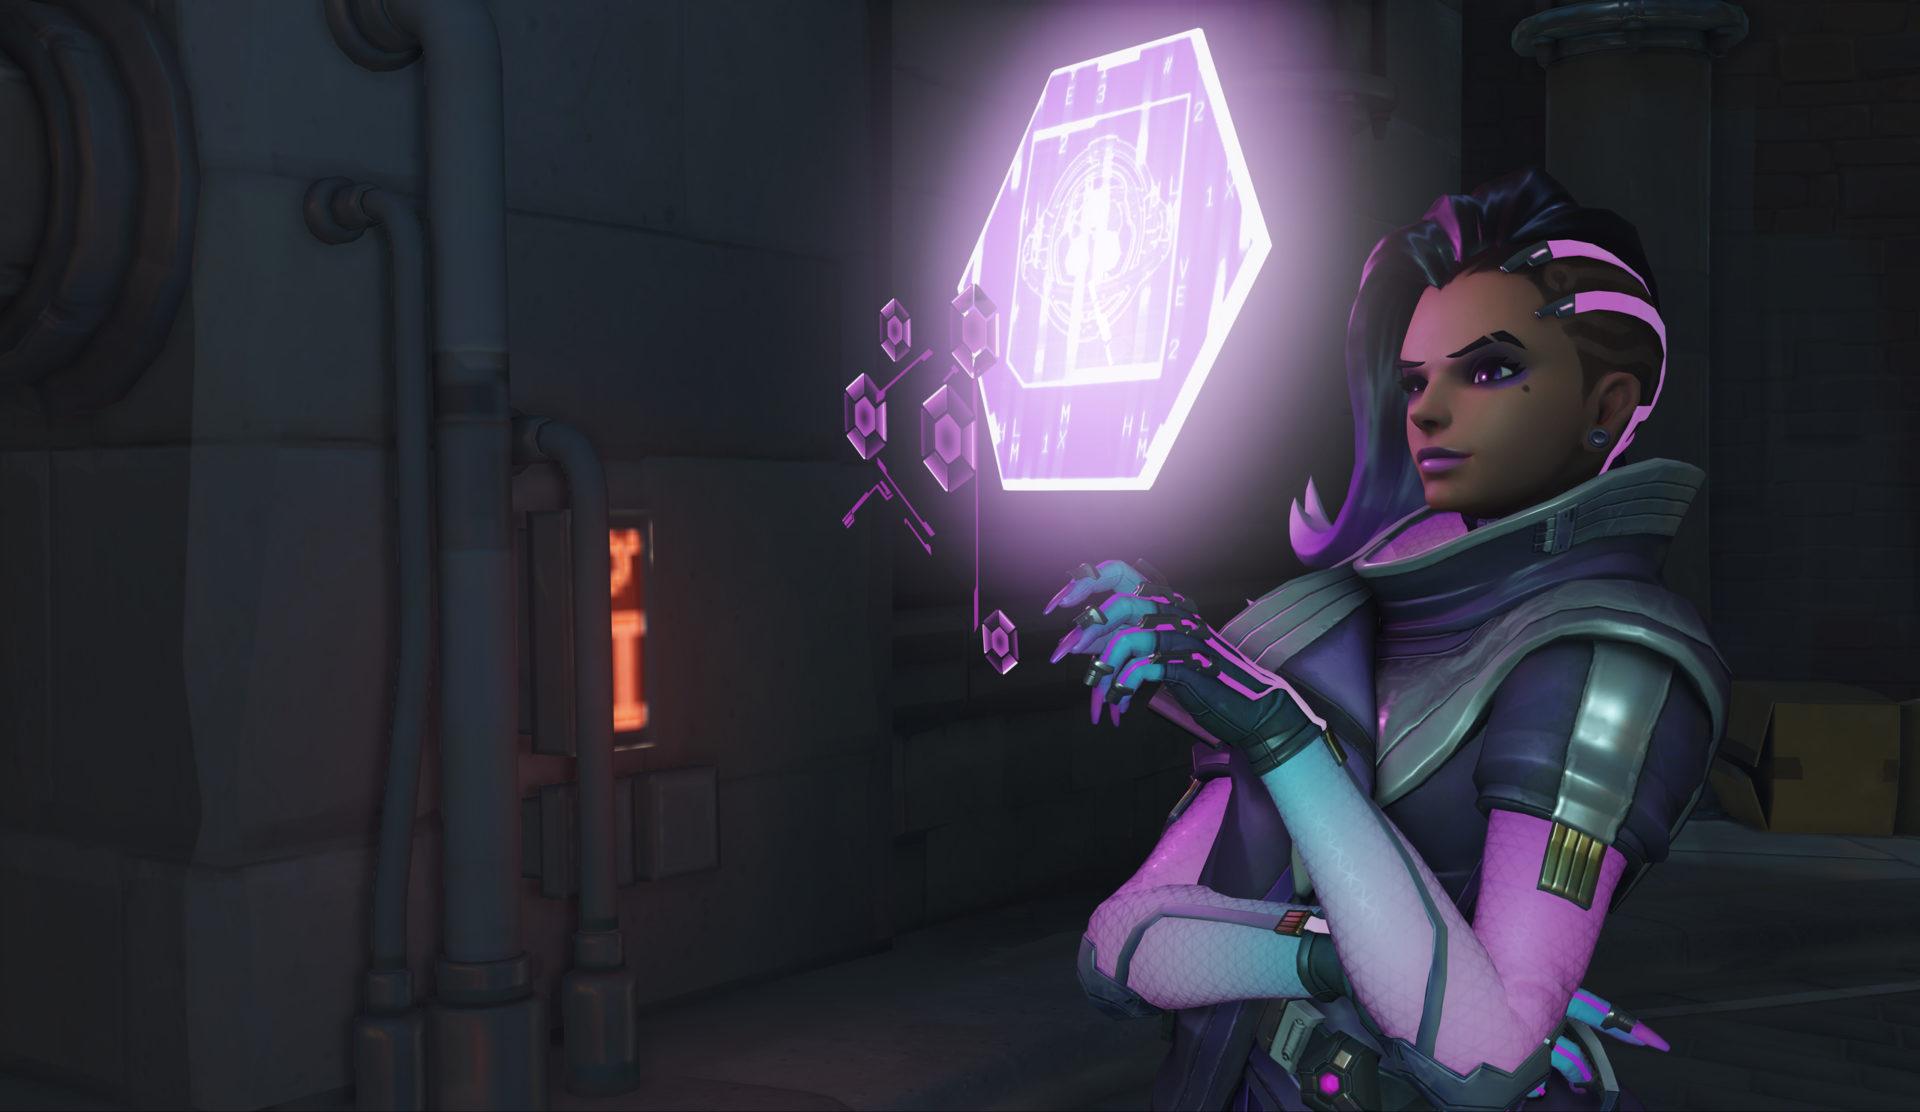 Sombra hacking the system